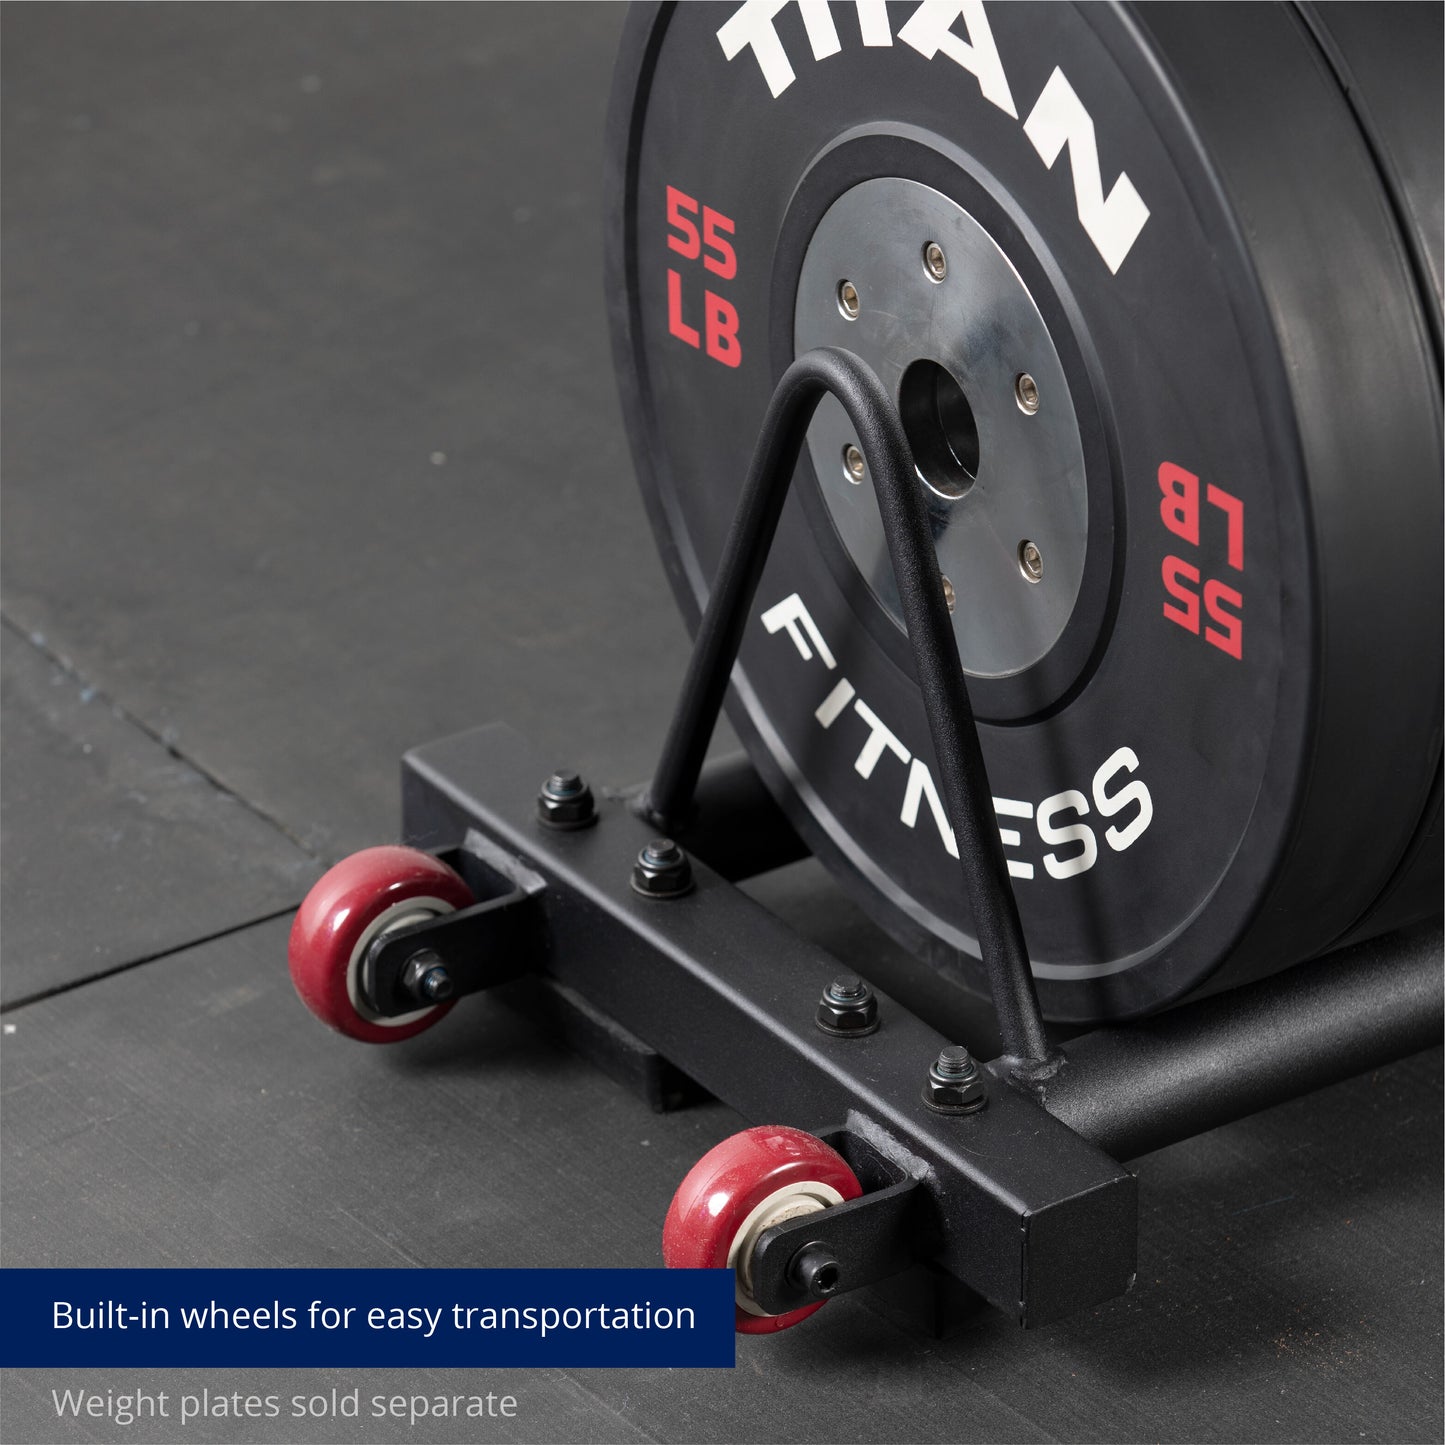 Horizontal Weight Plate Storage With Wheels - view 8